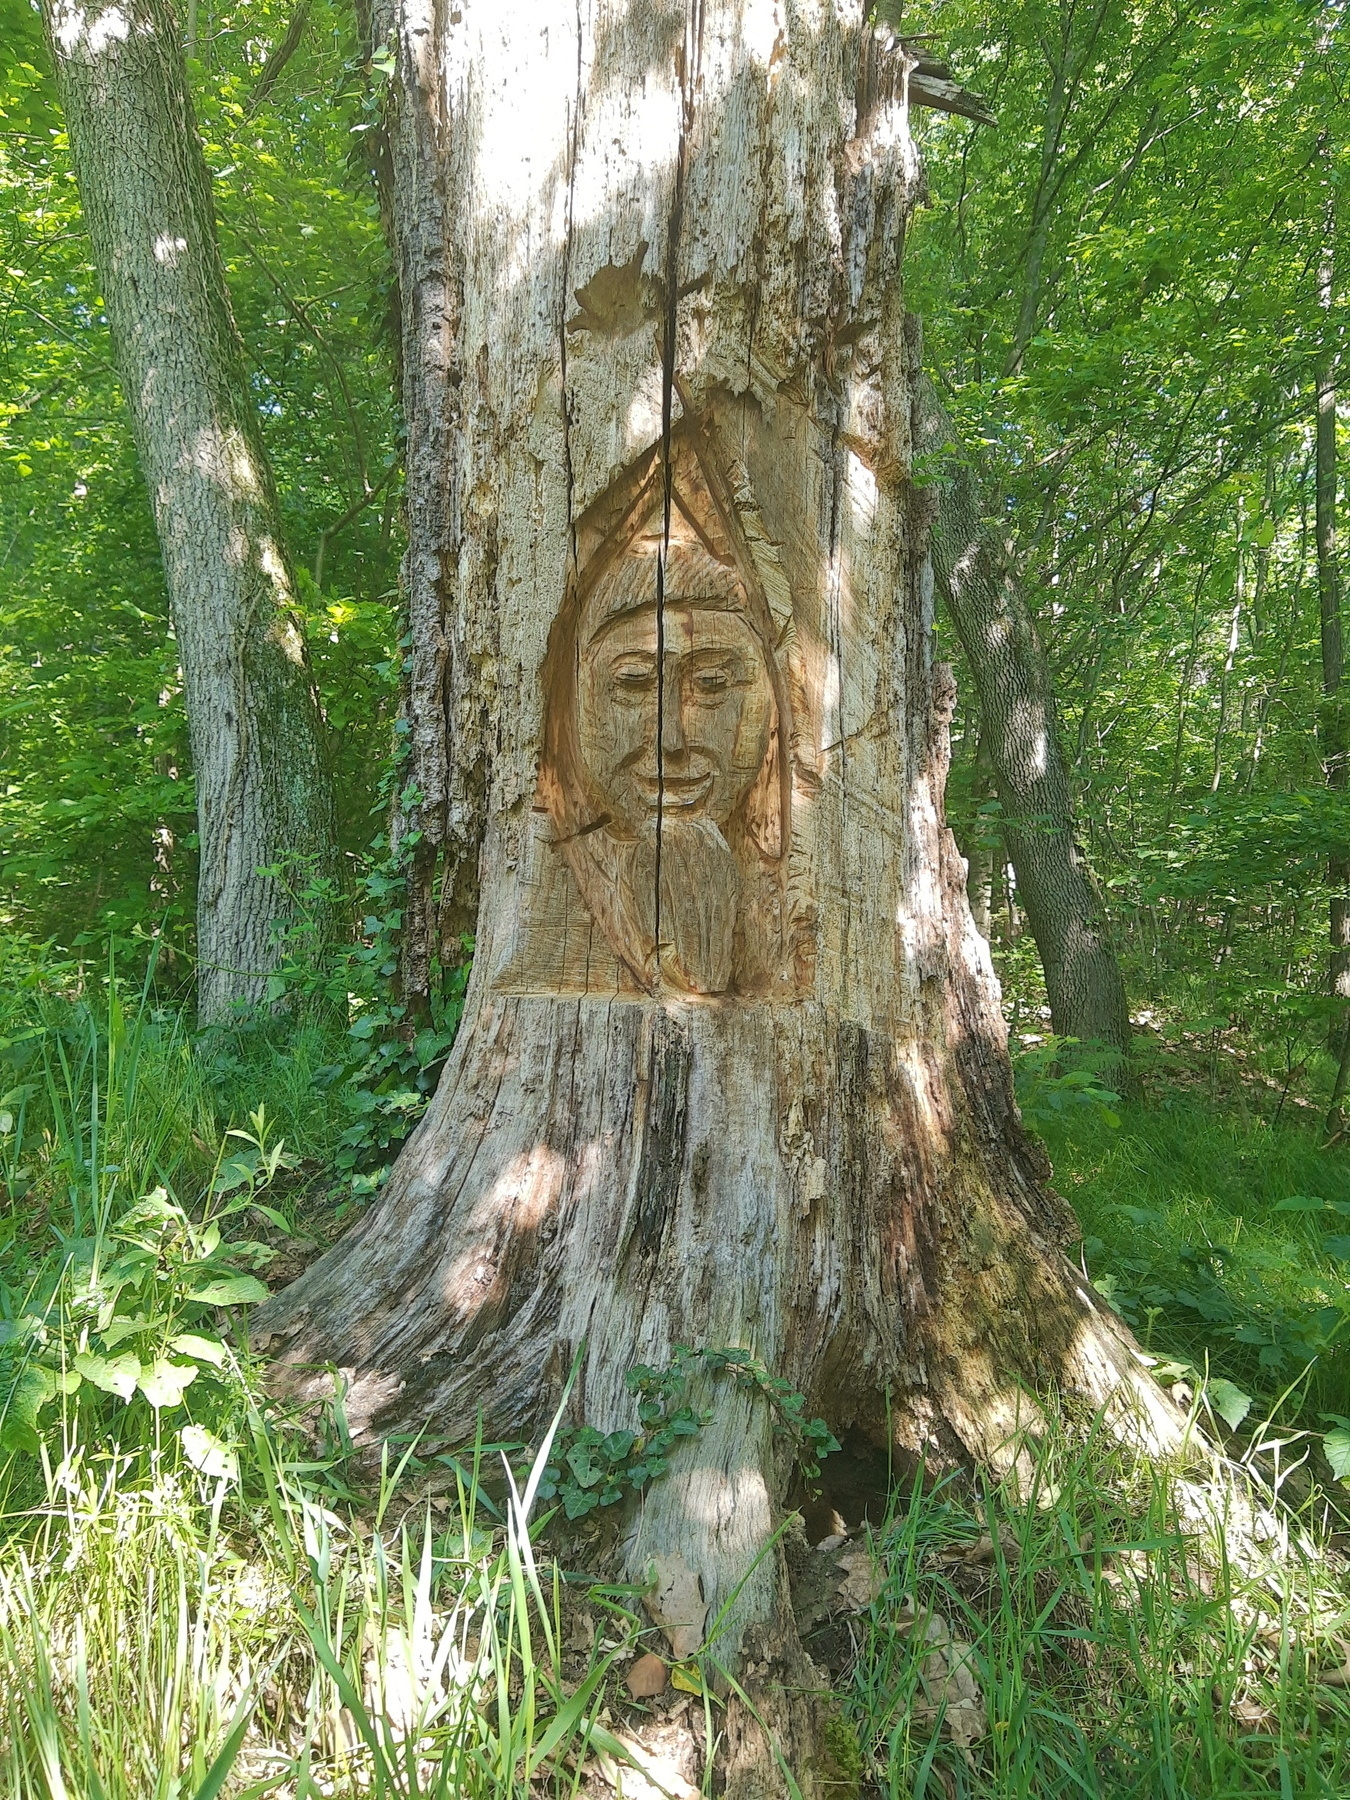 A tree with a sculpture